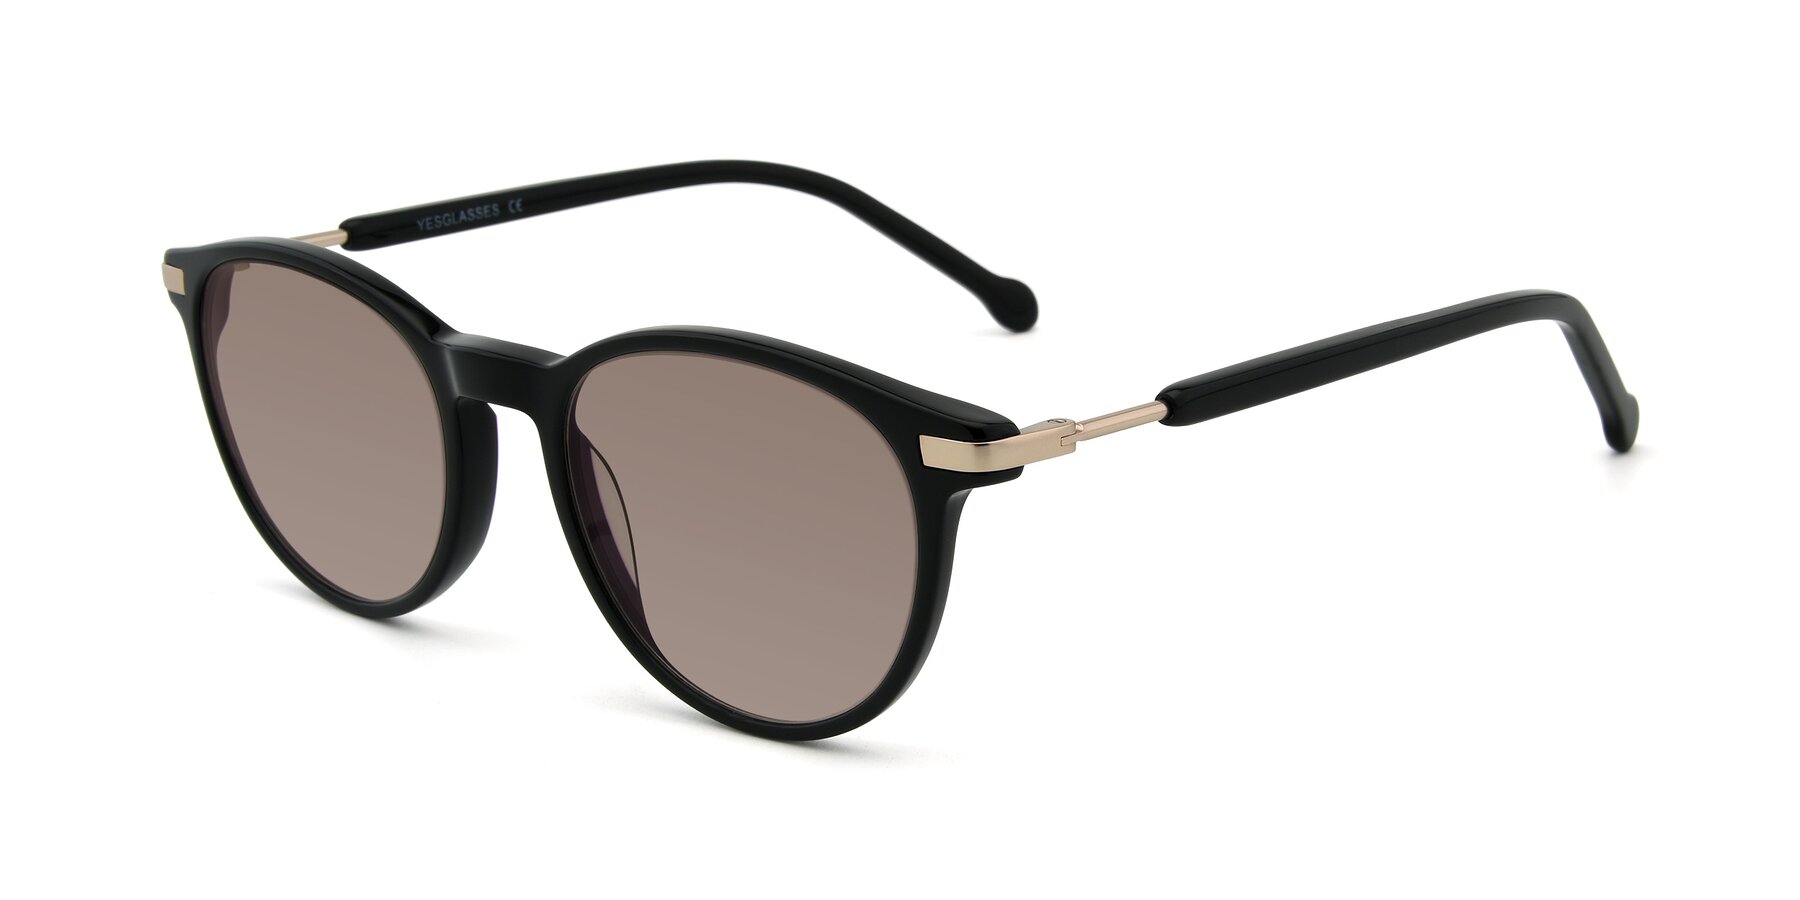 Angle of 17429 in Black with Medium Brown Tinted Lenses